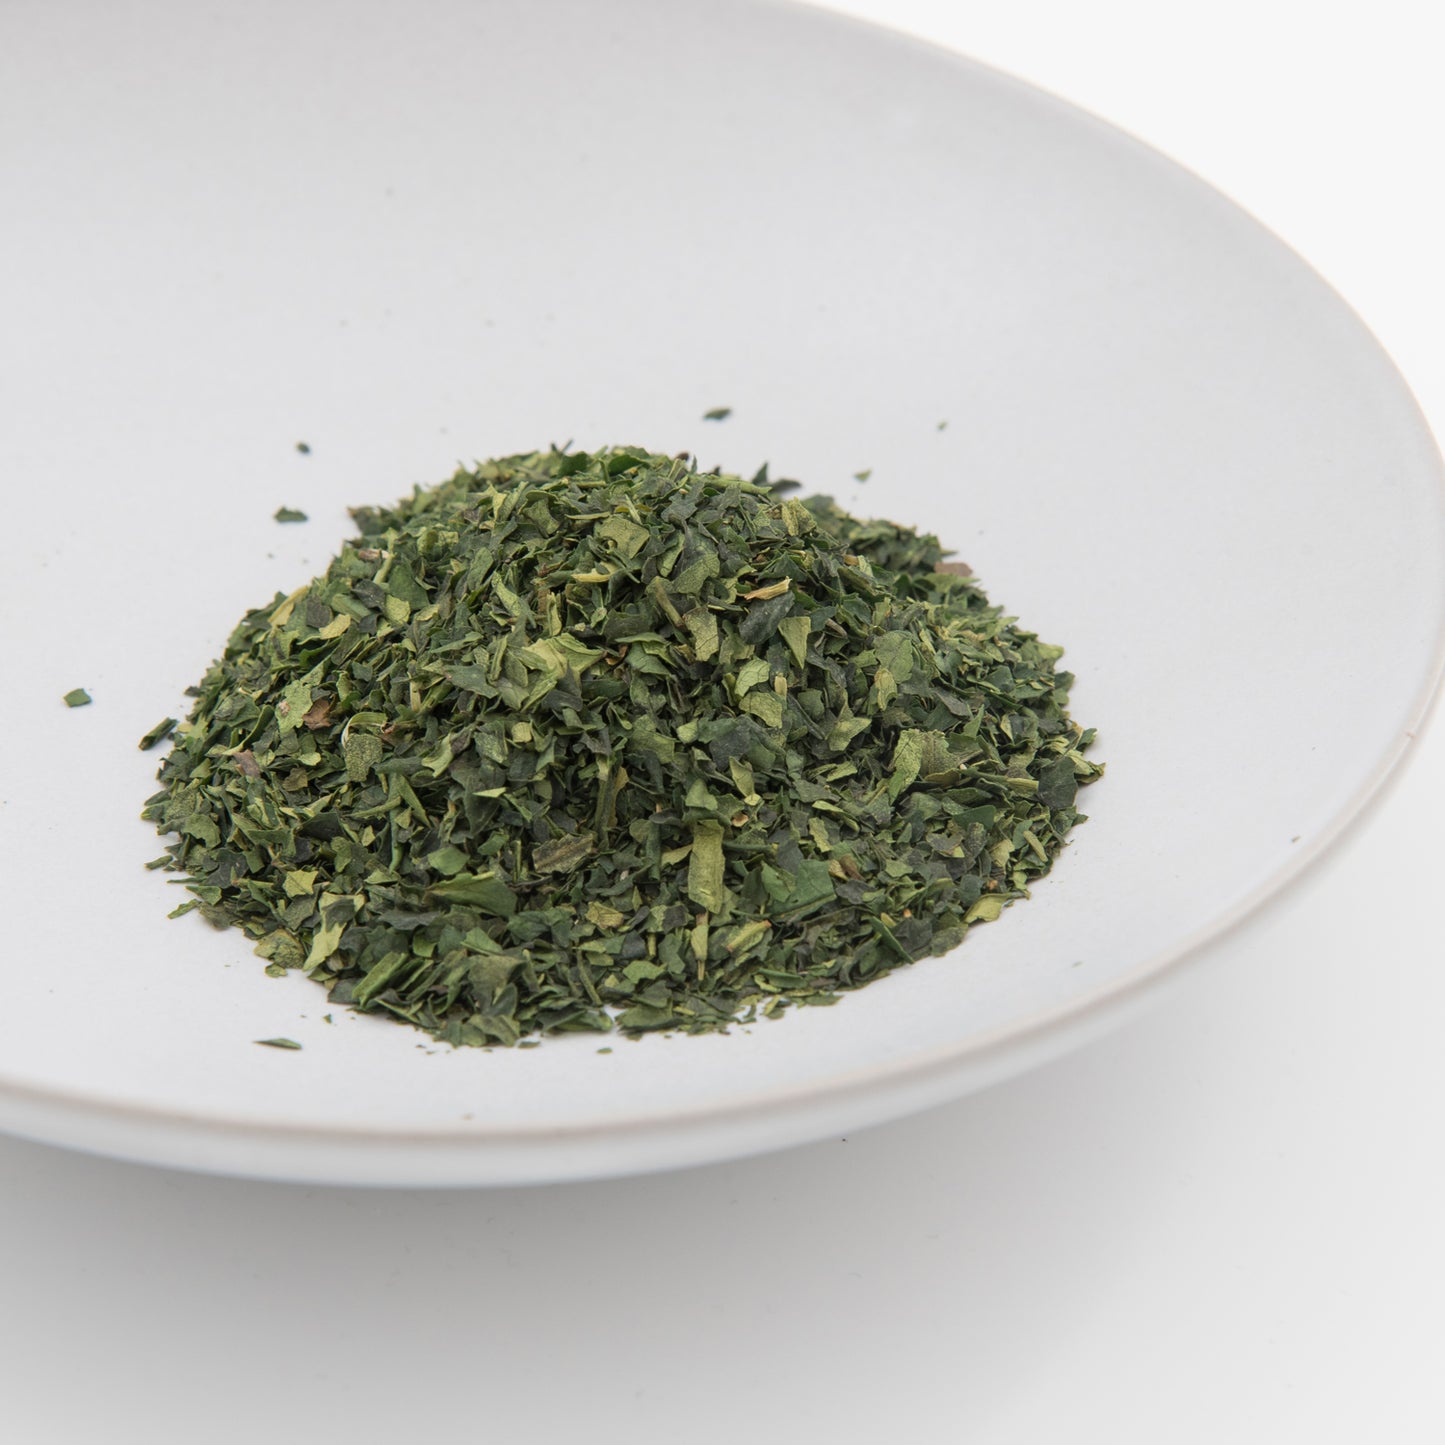  A neat mound of dark green whole matcha leaf on a white plate.